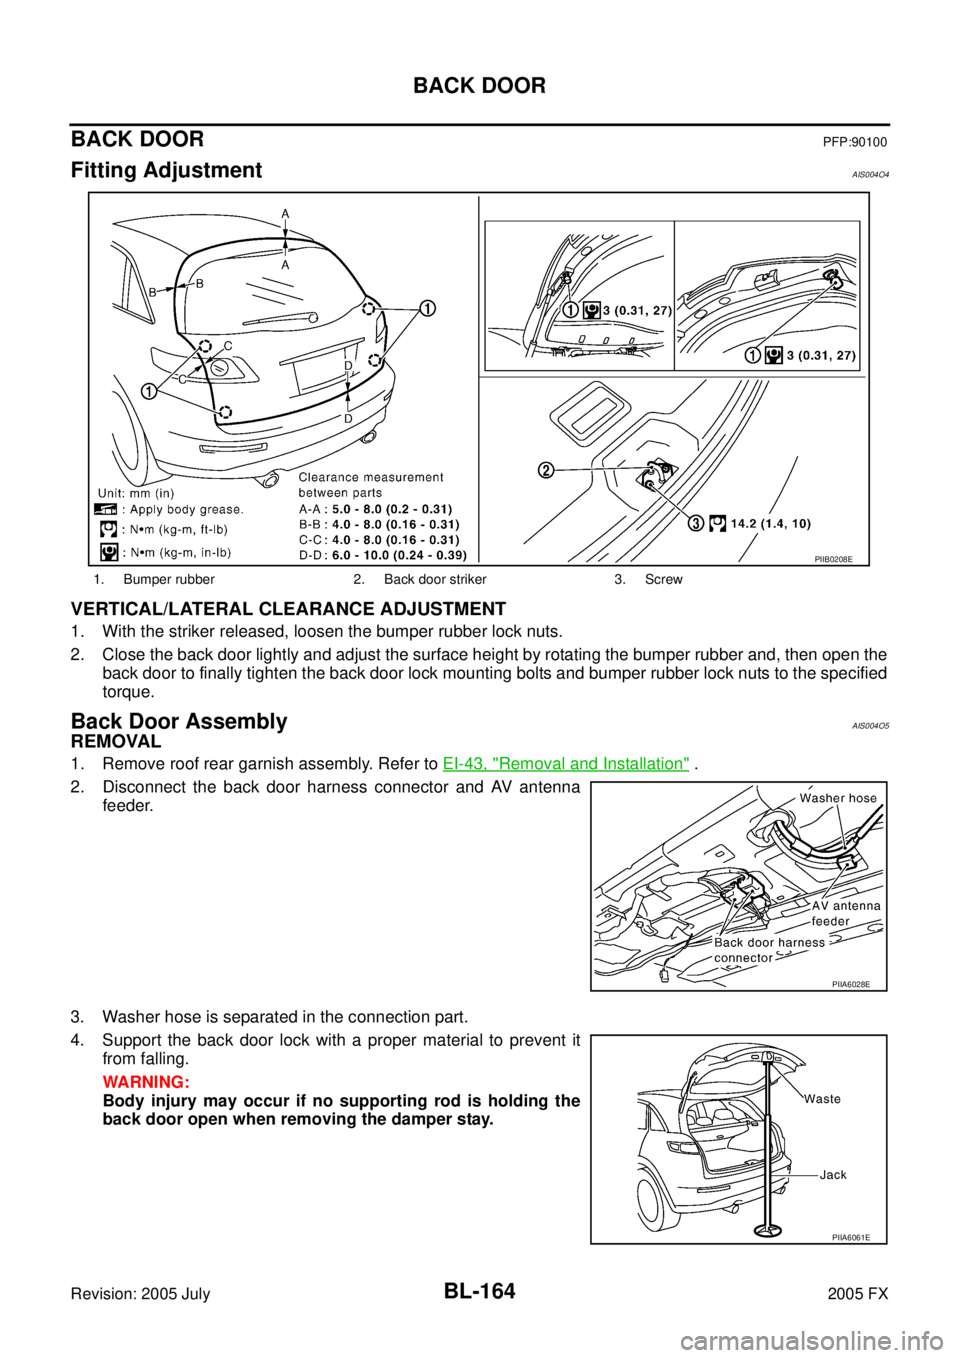 INFINITI FX35 2005  Service Manual BL-164
BACK DOOR
Revision: 2005 July 2005 FX
BACK DOORPFP:90100
Fitting AdjustmentAIS004O4
VERTICAL/LATERAL CLEARANCE ADJUSTMENT
1. With the striker released, loosen the bumper rubber lock nuts. 
2. C